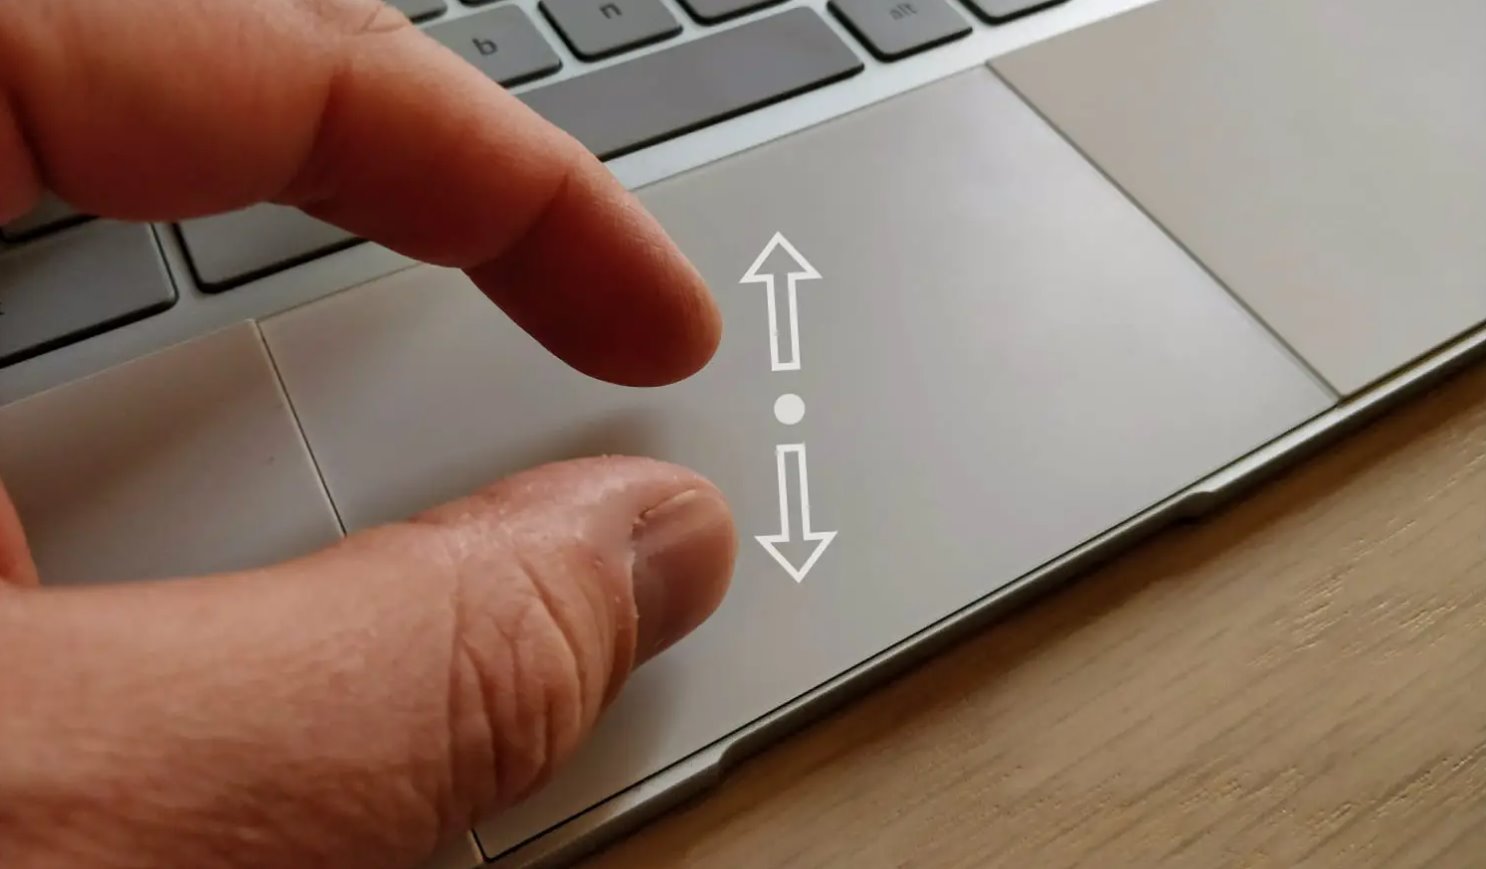 How To Turn Off Trackpad Zoom